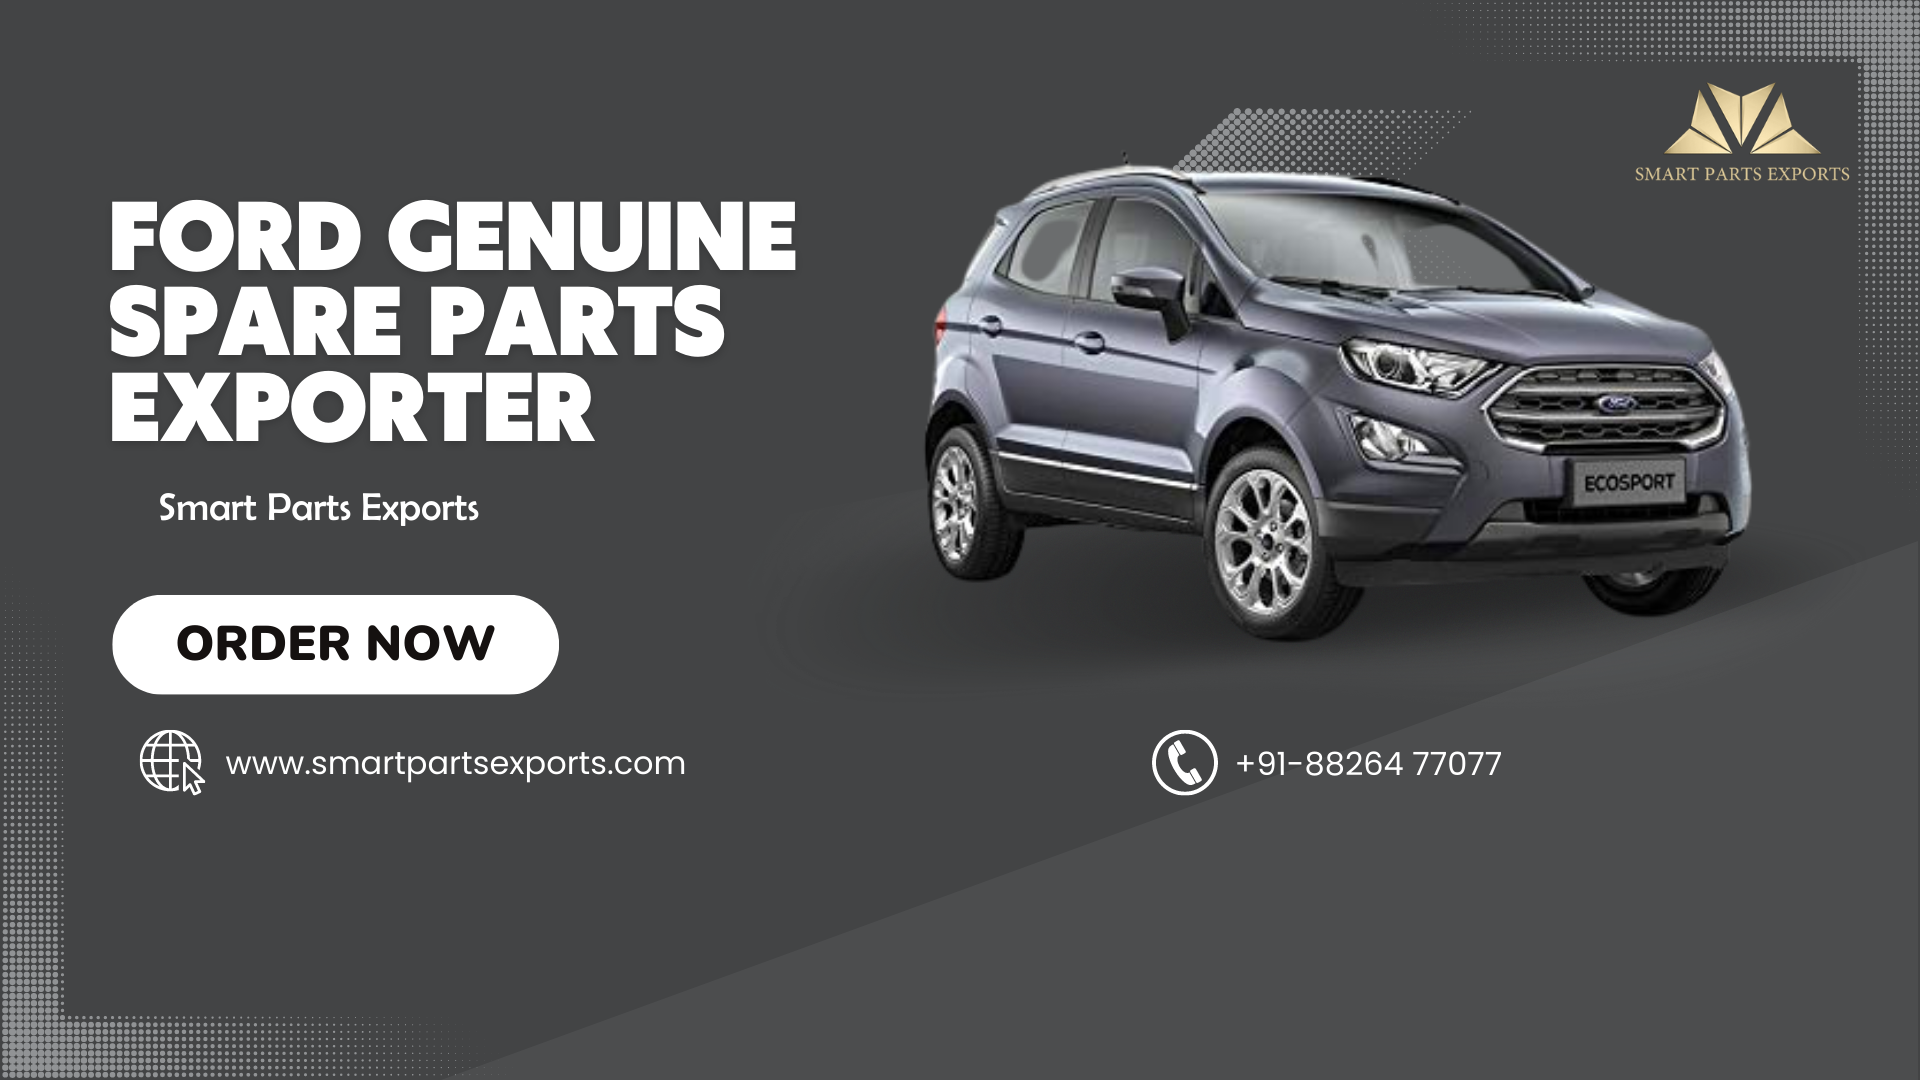 Ford Genuine Spare Parts Exporter | Smart Parts Exports